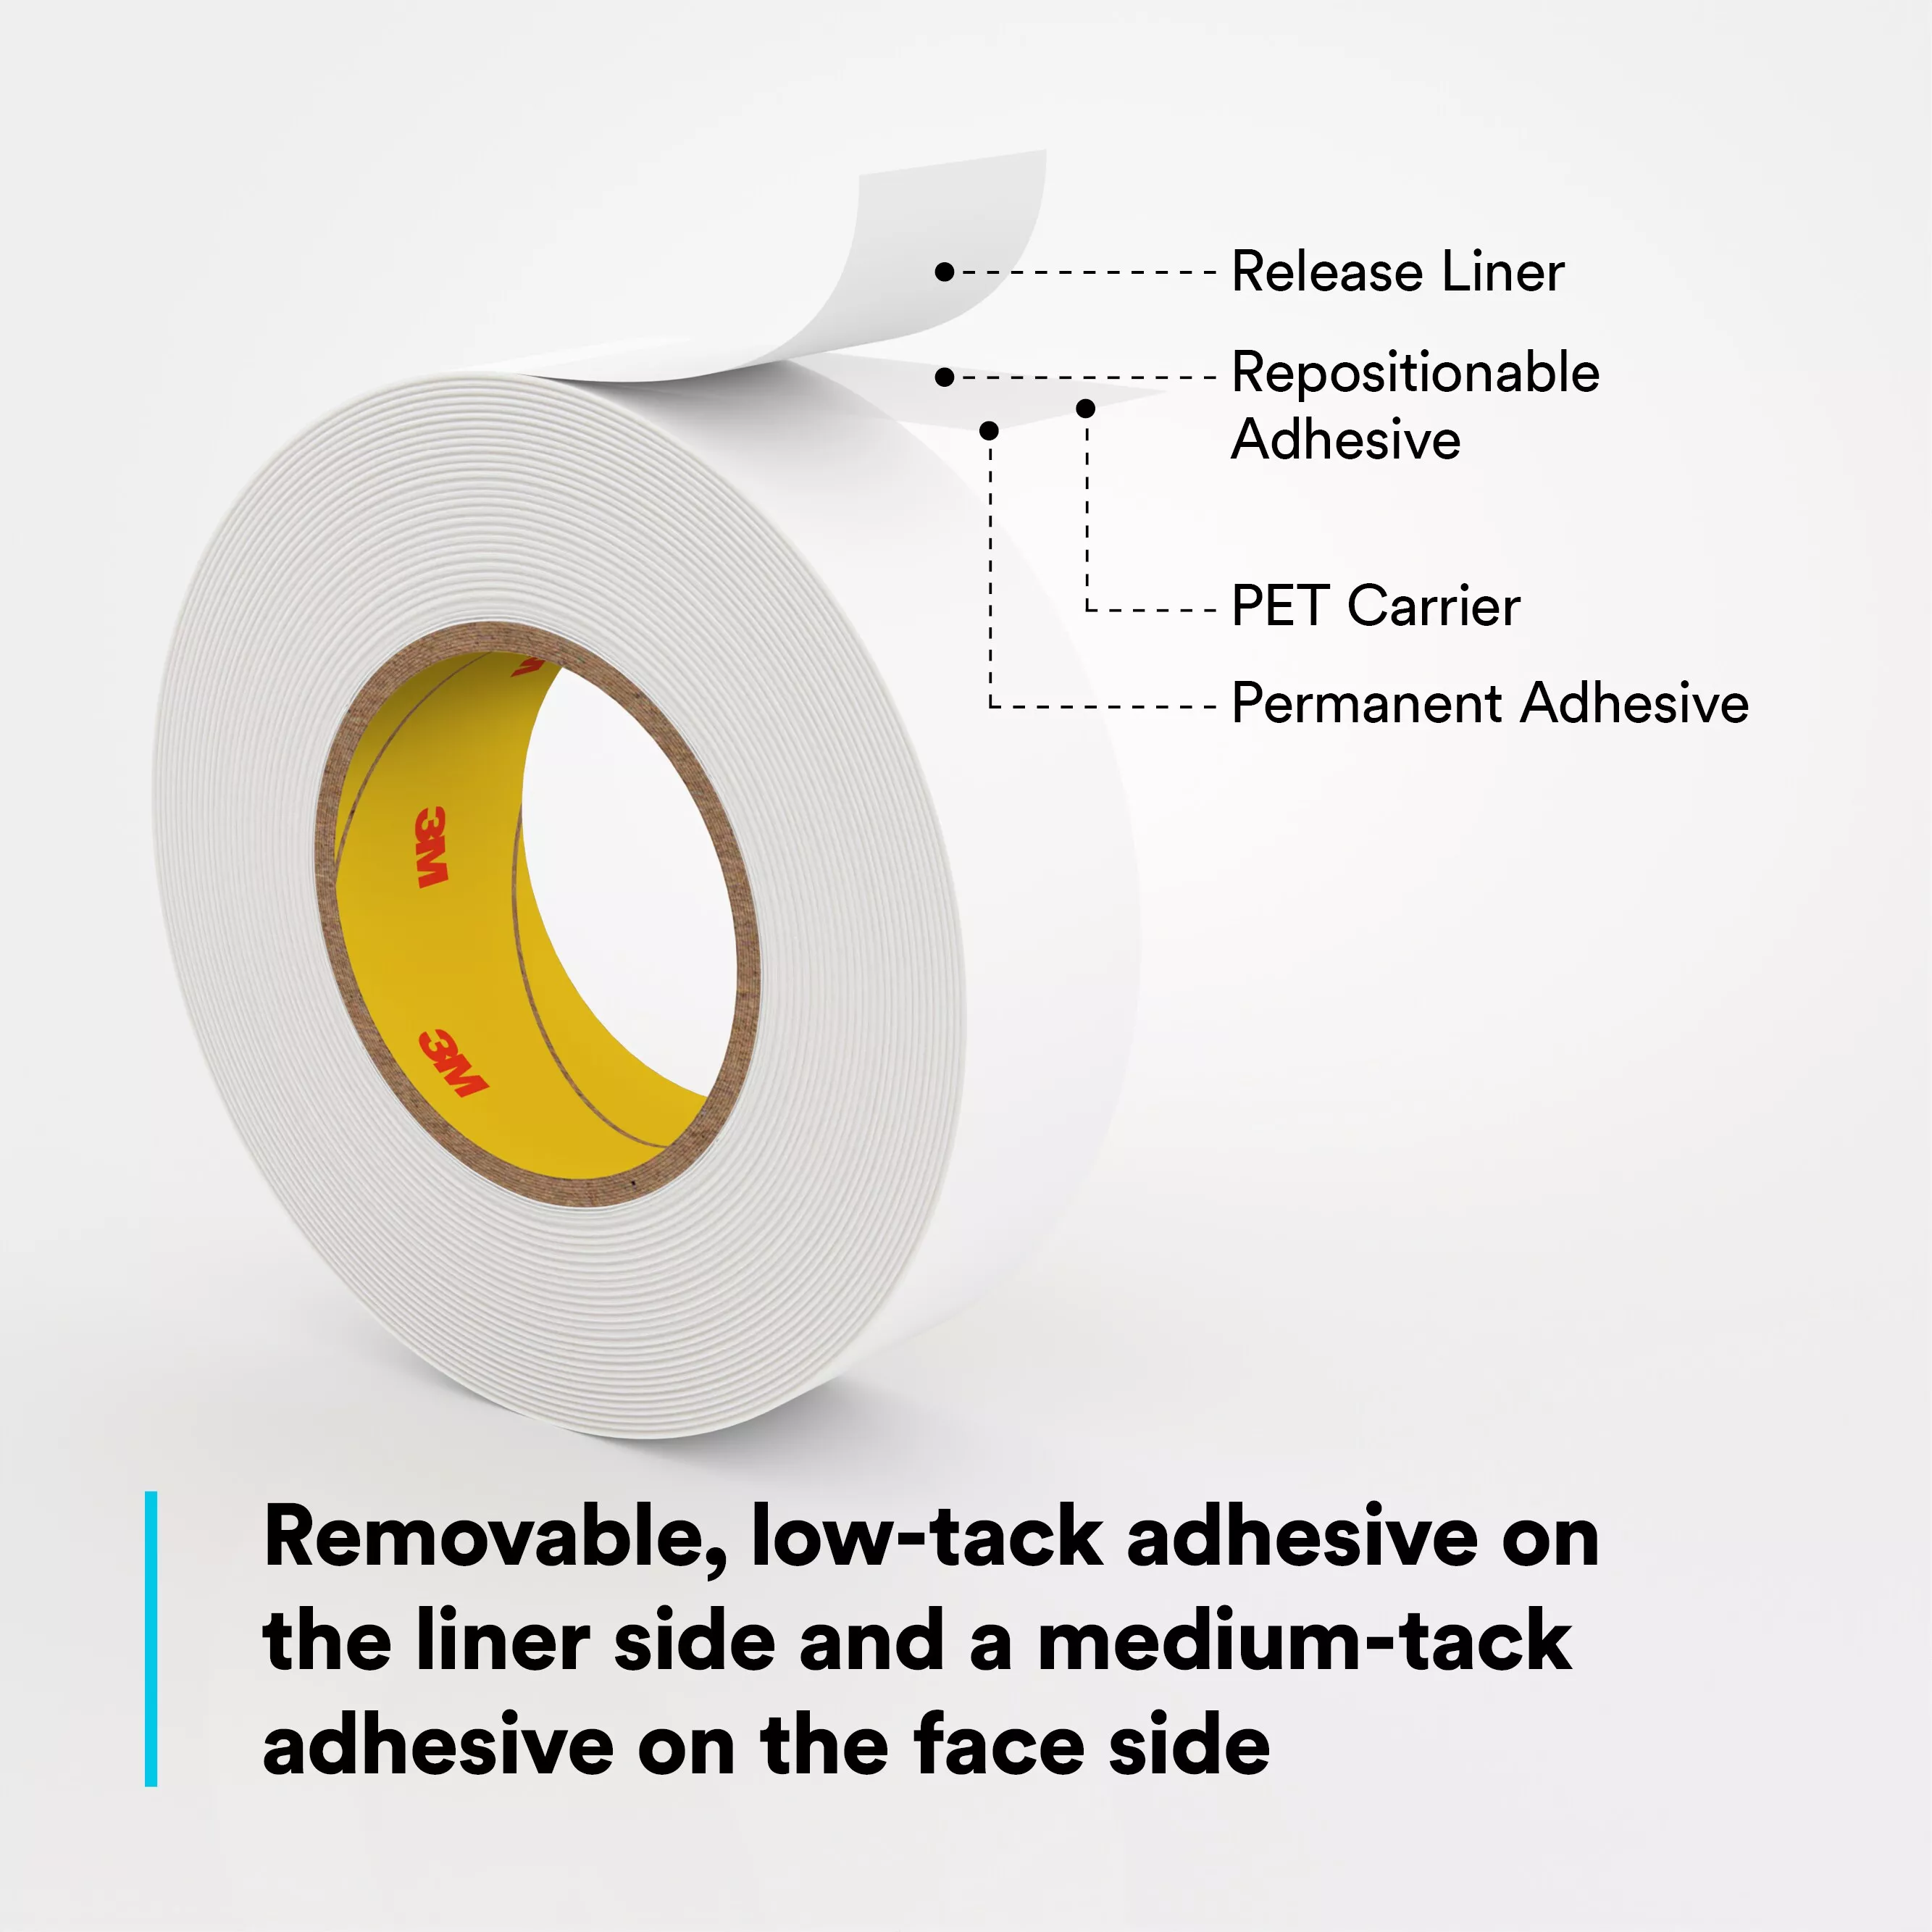 SKU 7000048825 | 3M™ Removable Repositionable Tape 9415PC